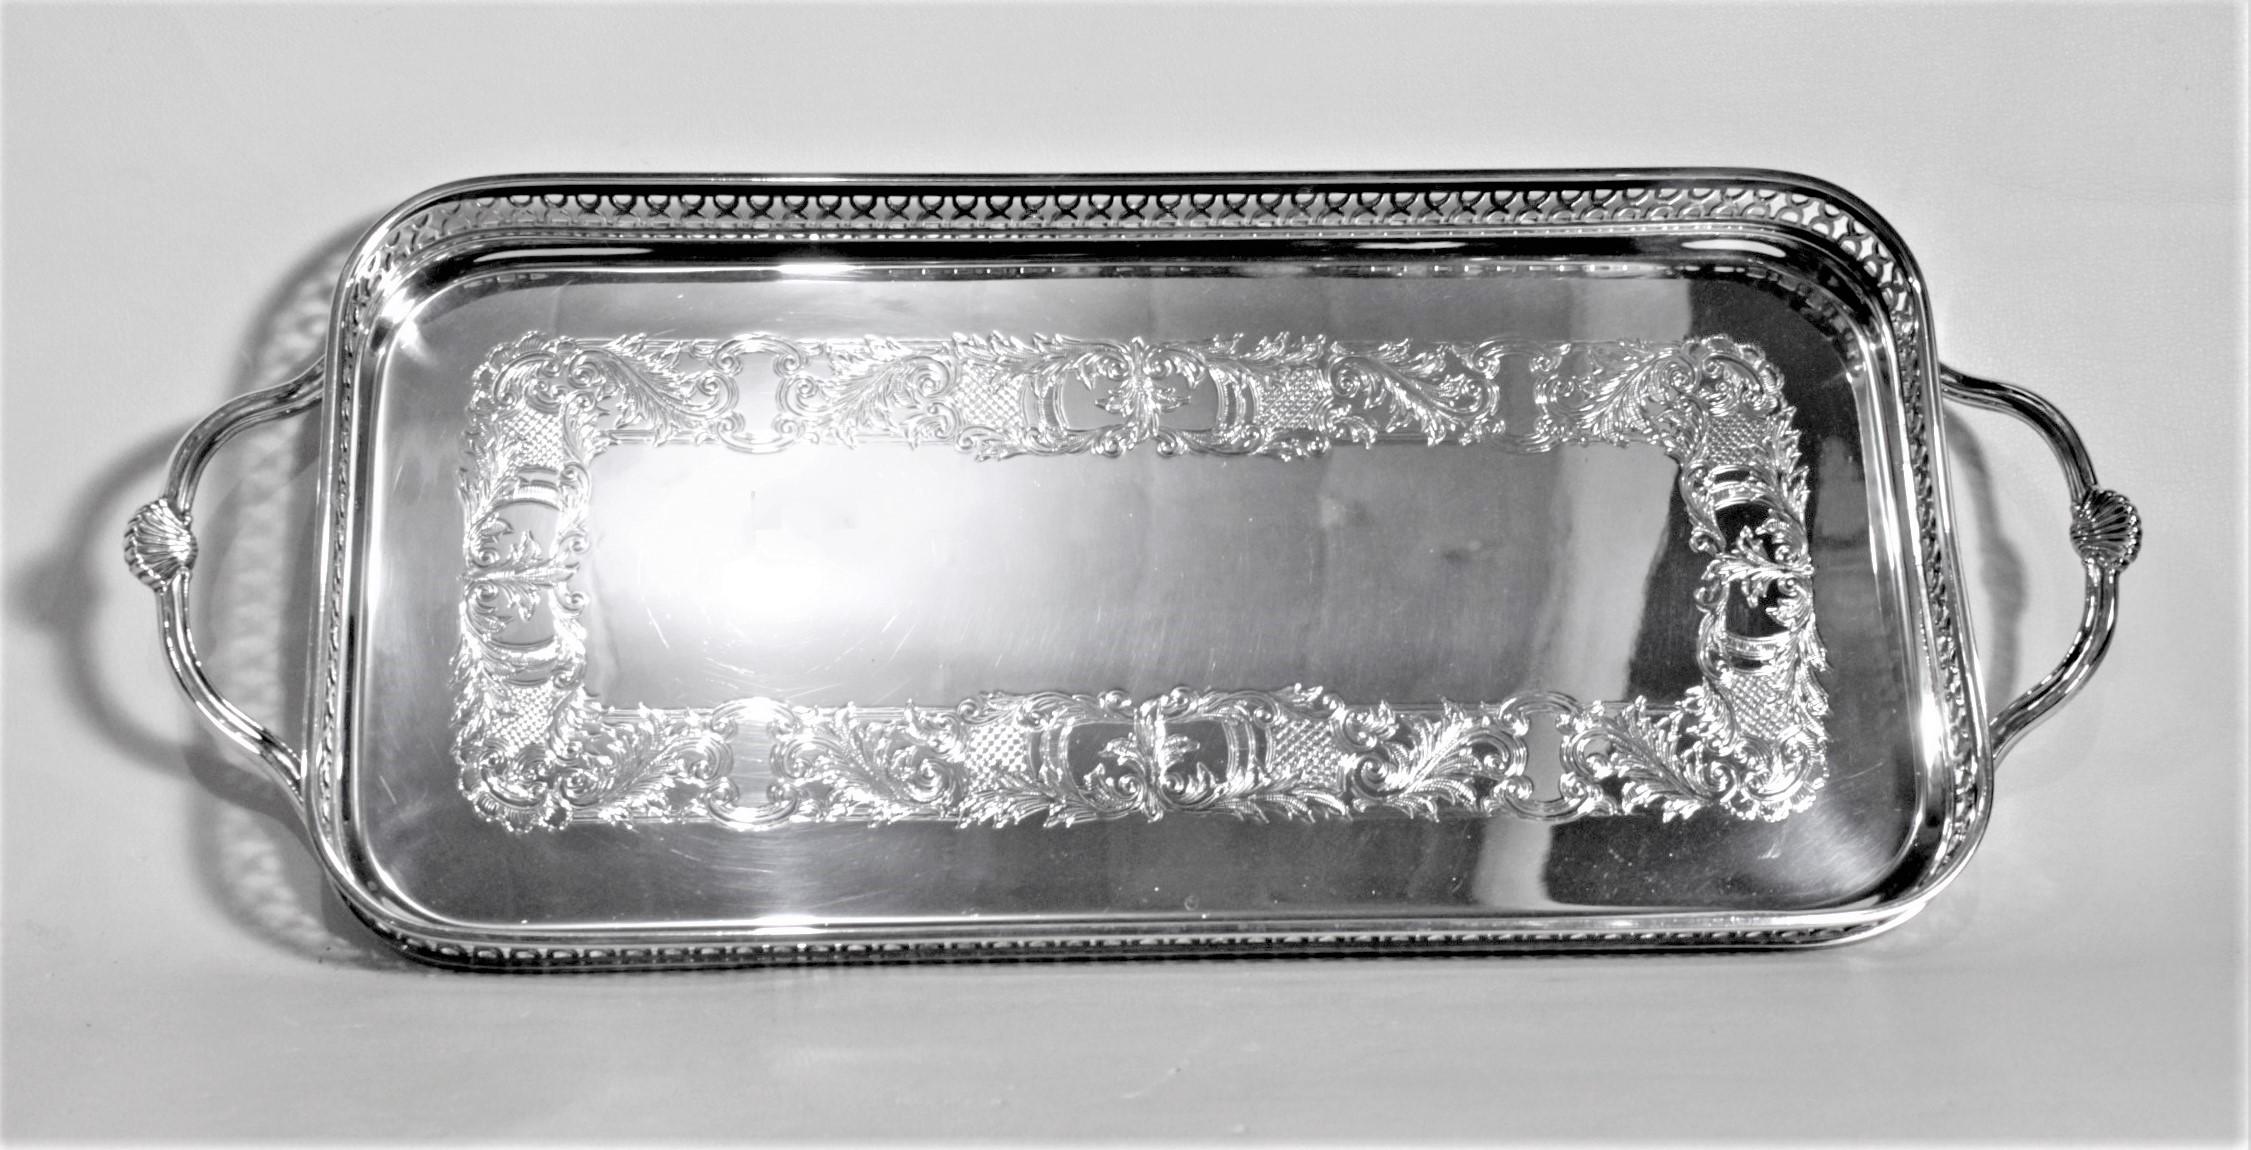 Edwardian Antique Styled Rectangular Silver Plated English Gallery Serving Tray